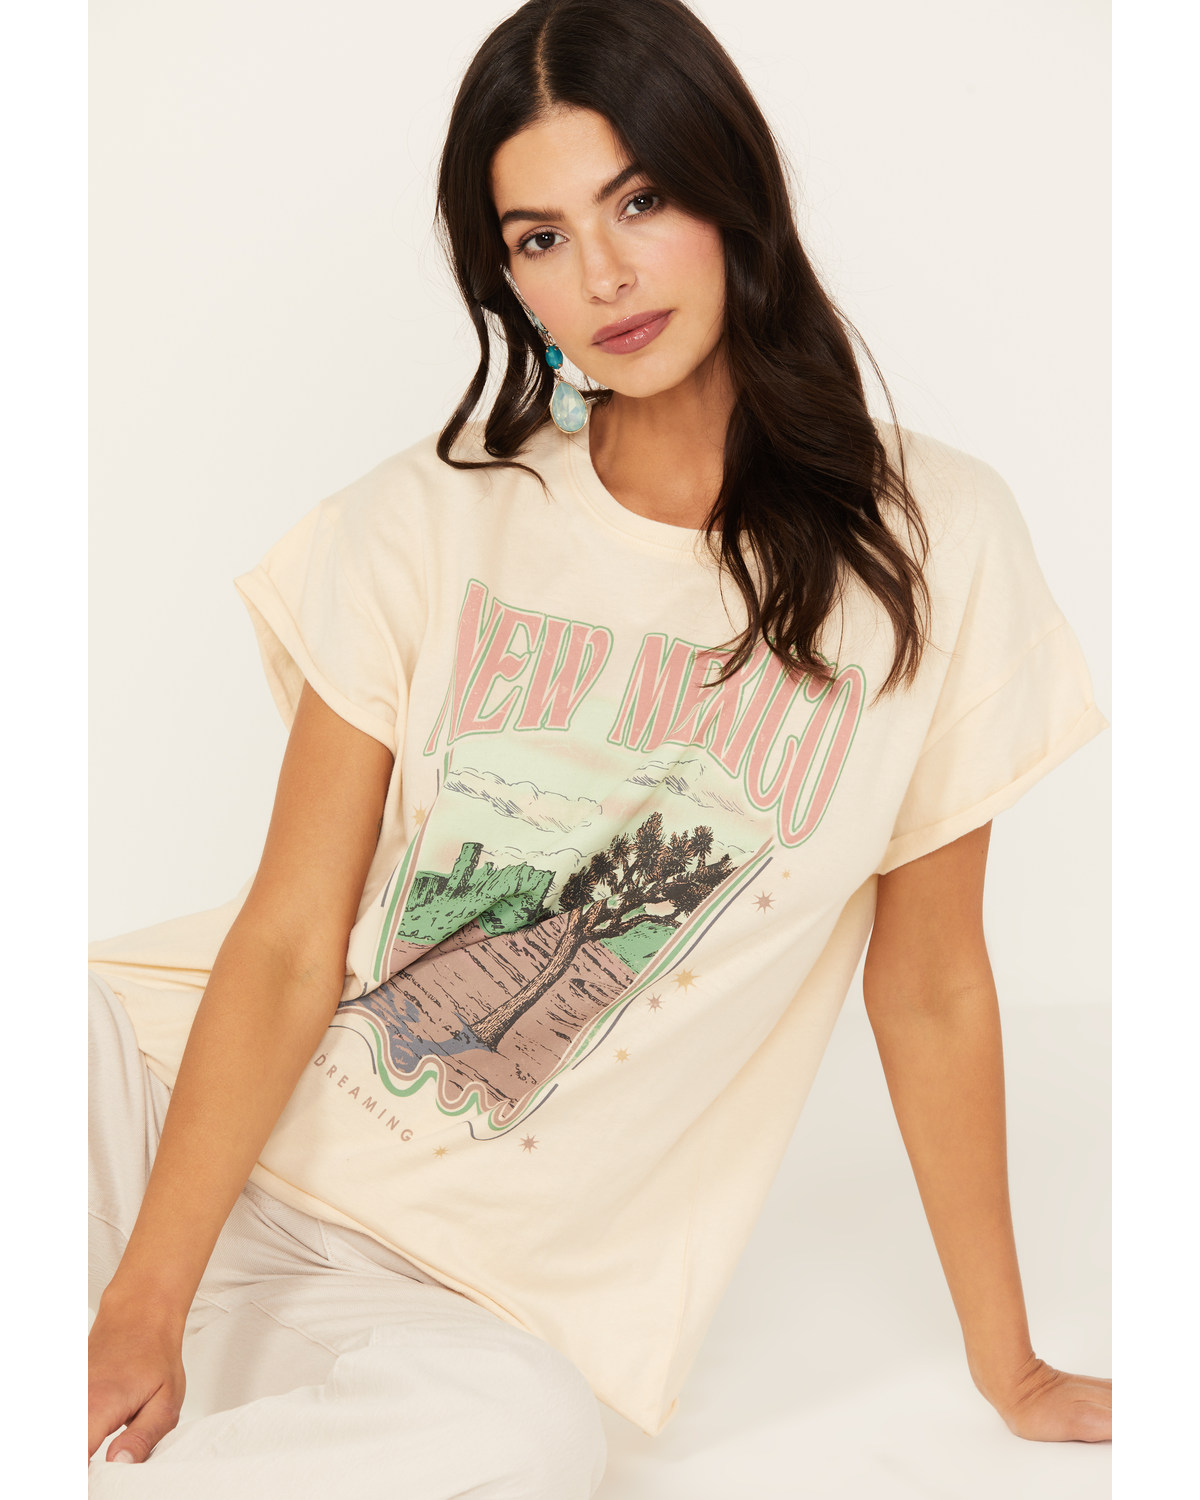 Cleo + Wolf Women's New Mexico Short Sleeve Graphic Tee